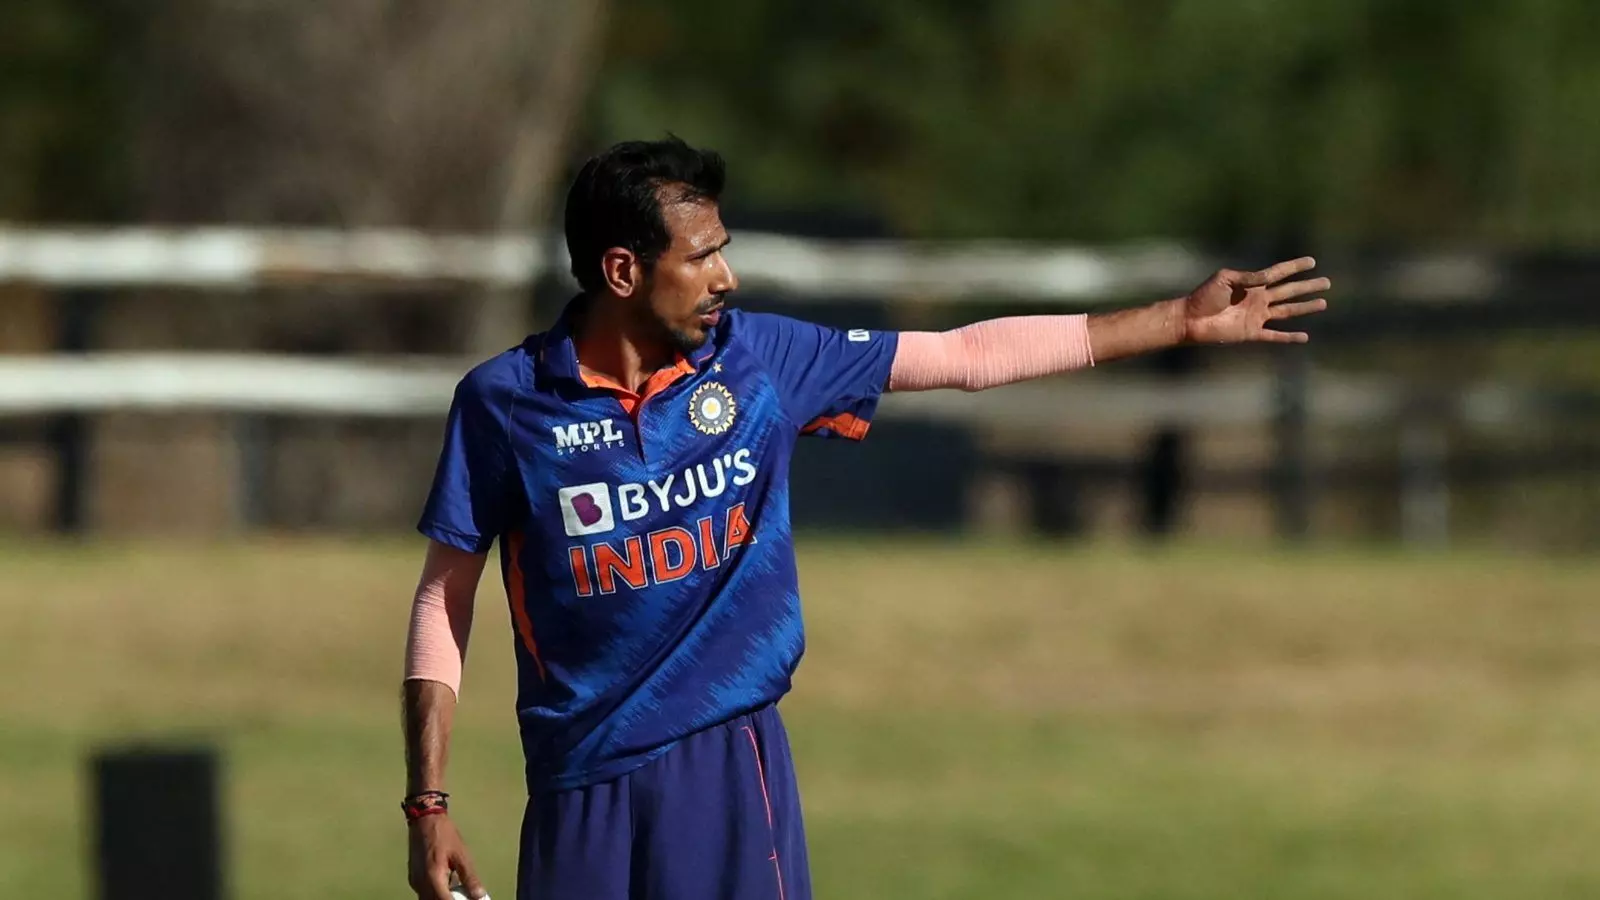 Pakistan are good team but..., Yuzvendra Chahal makes a BIG statement ahead of IND vs PAK clash at T20 World Cup